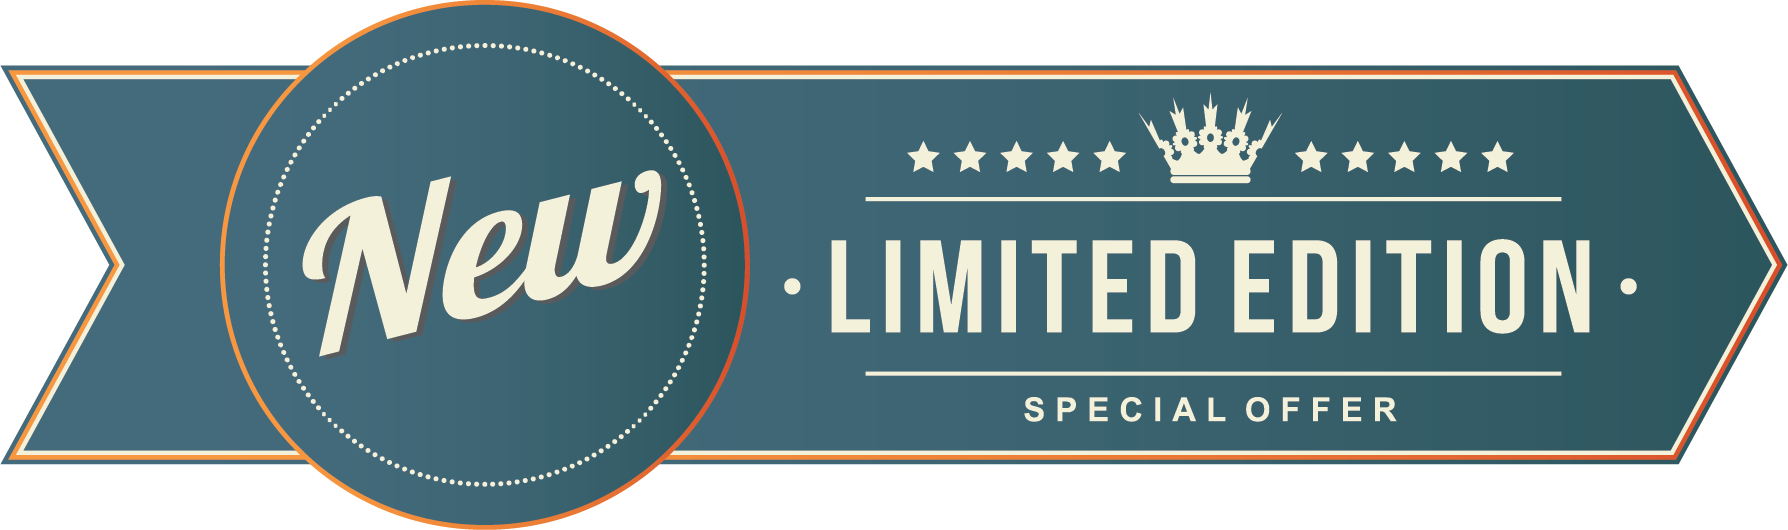 Limited Edition Special Offer Banner PNG